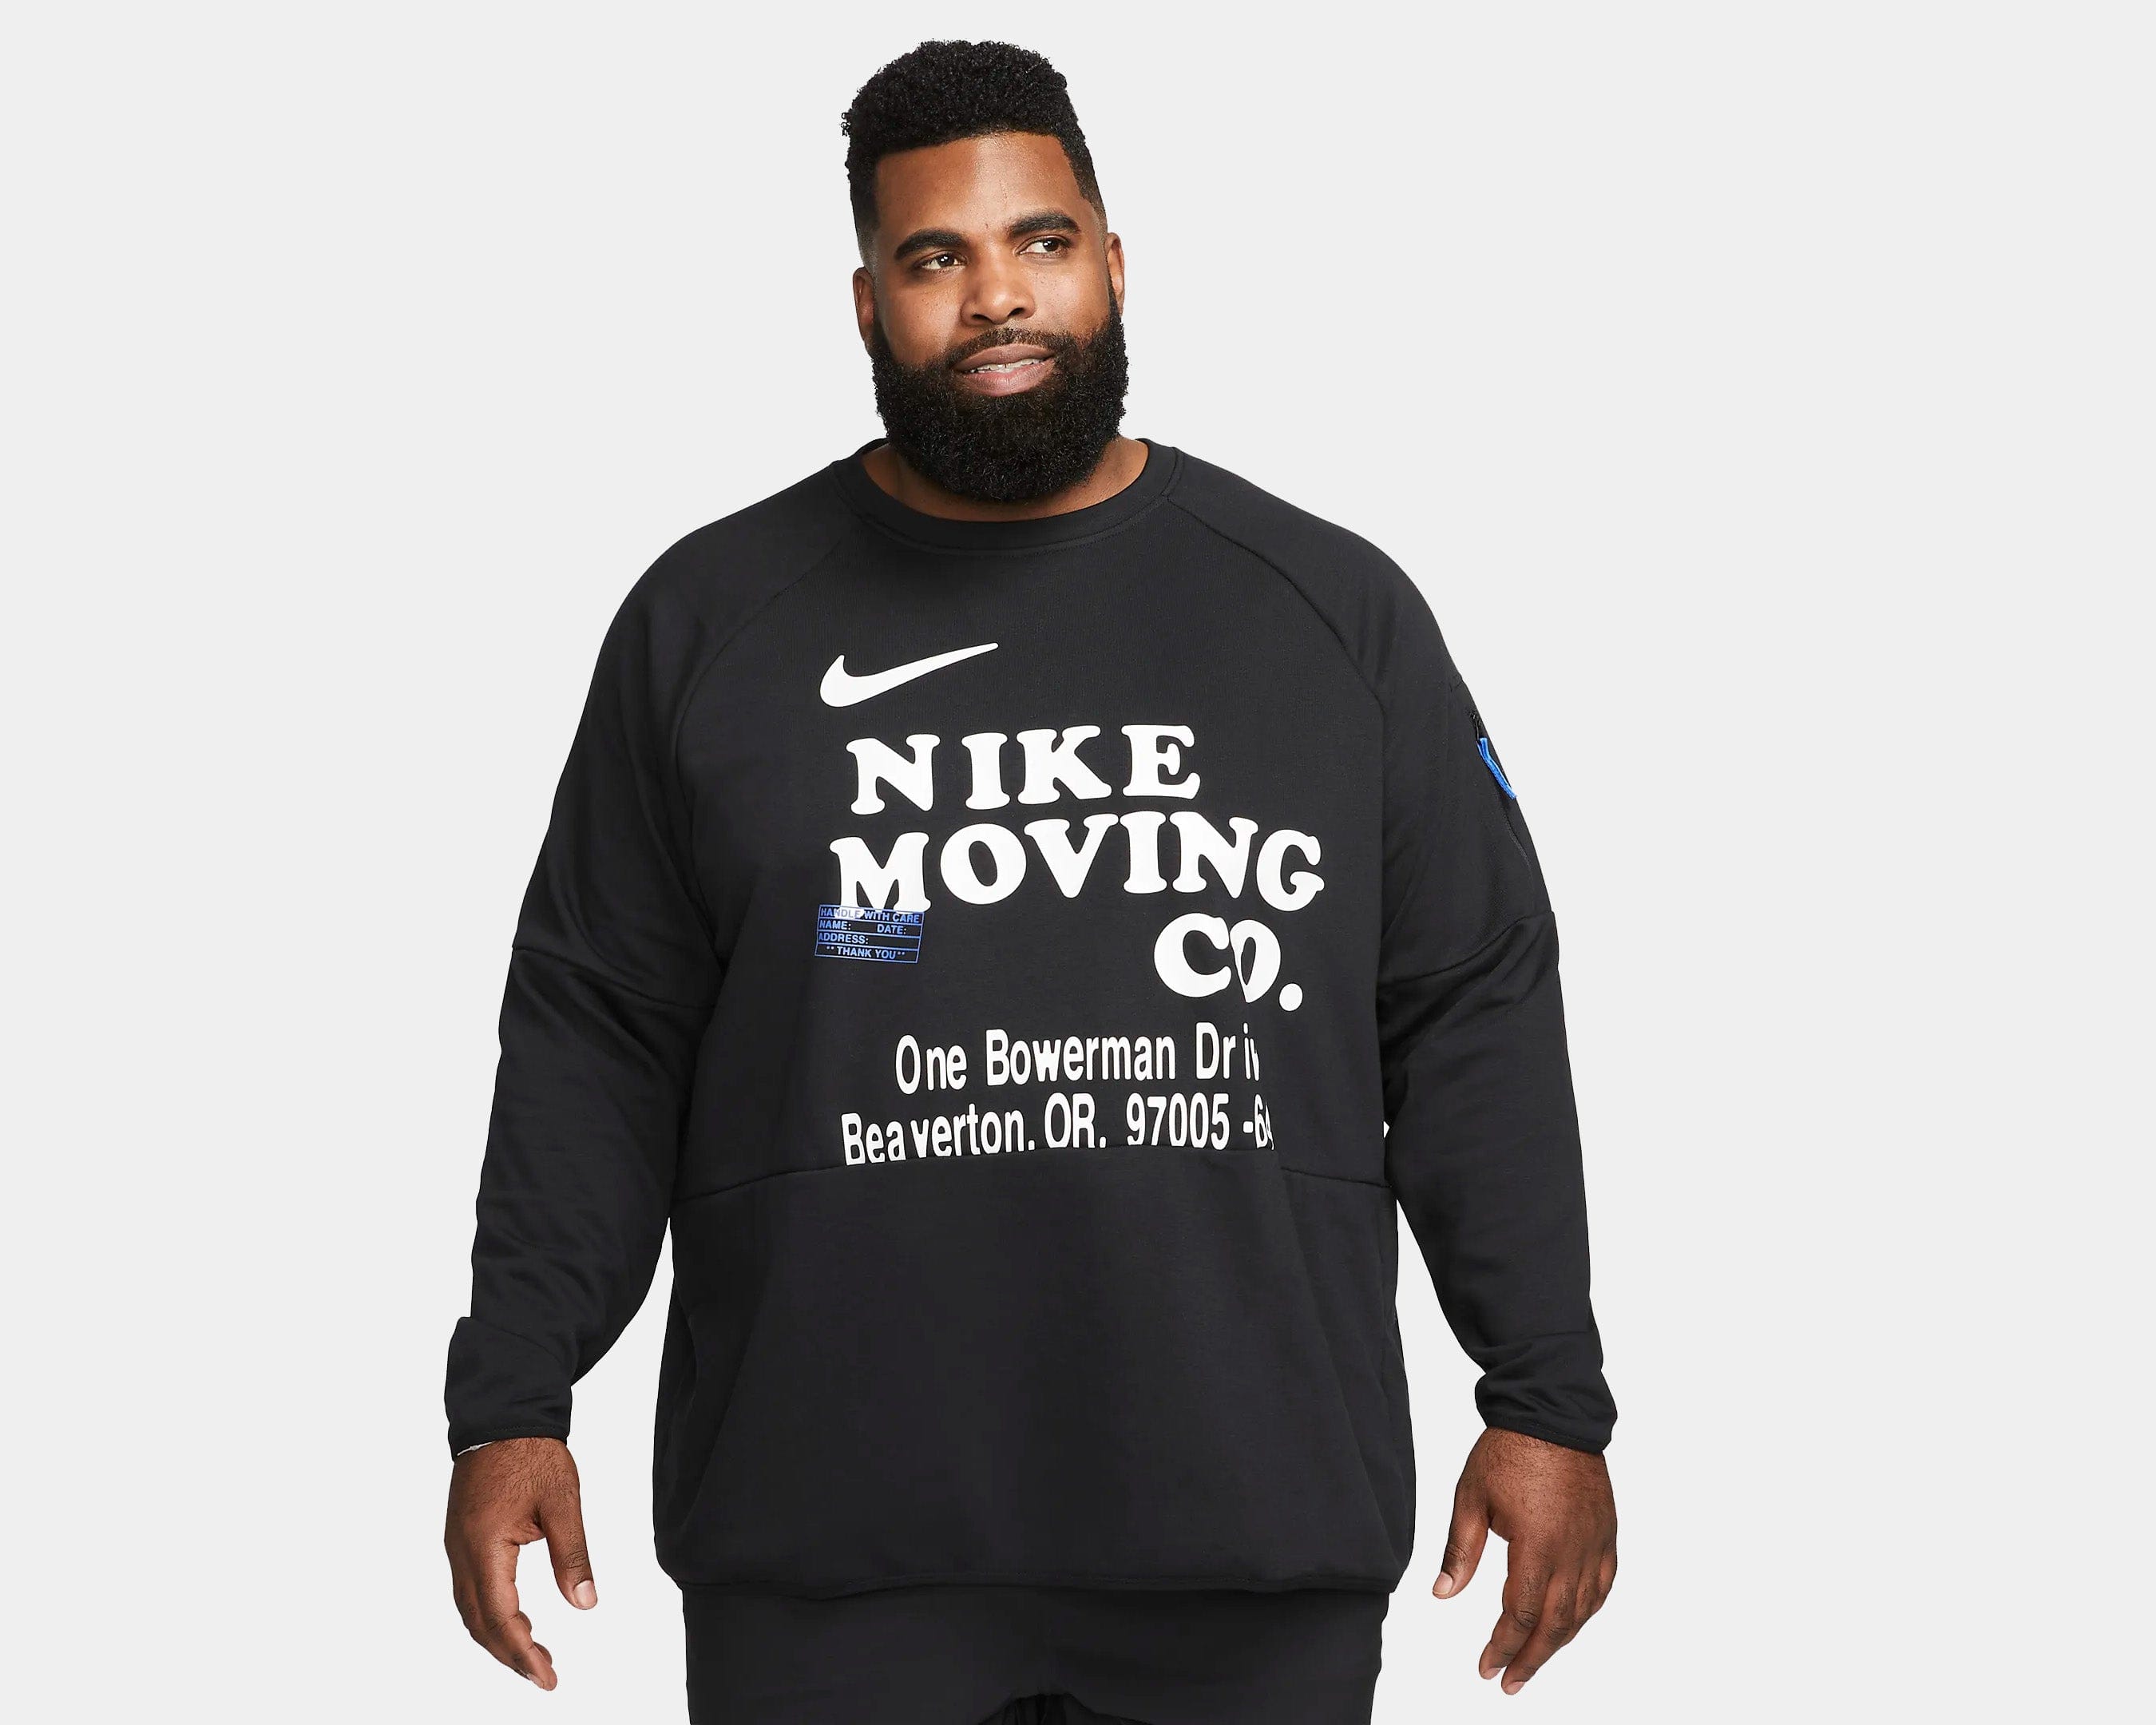 Dri-FIT Long-Sleeve Fitness Top product image